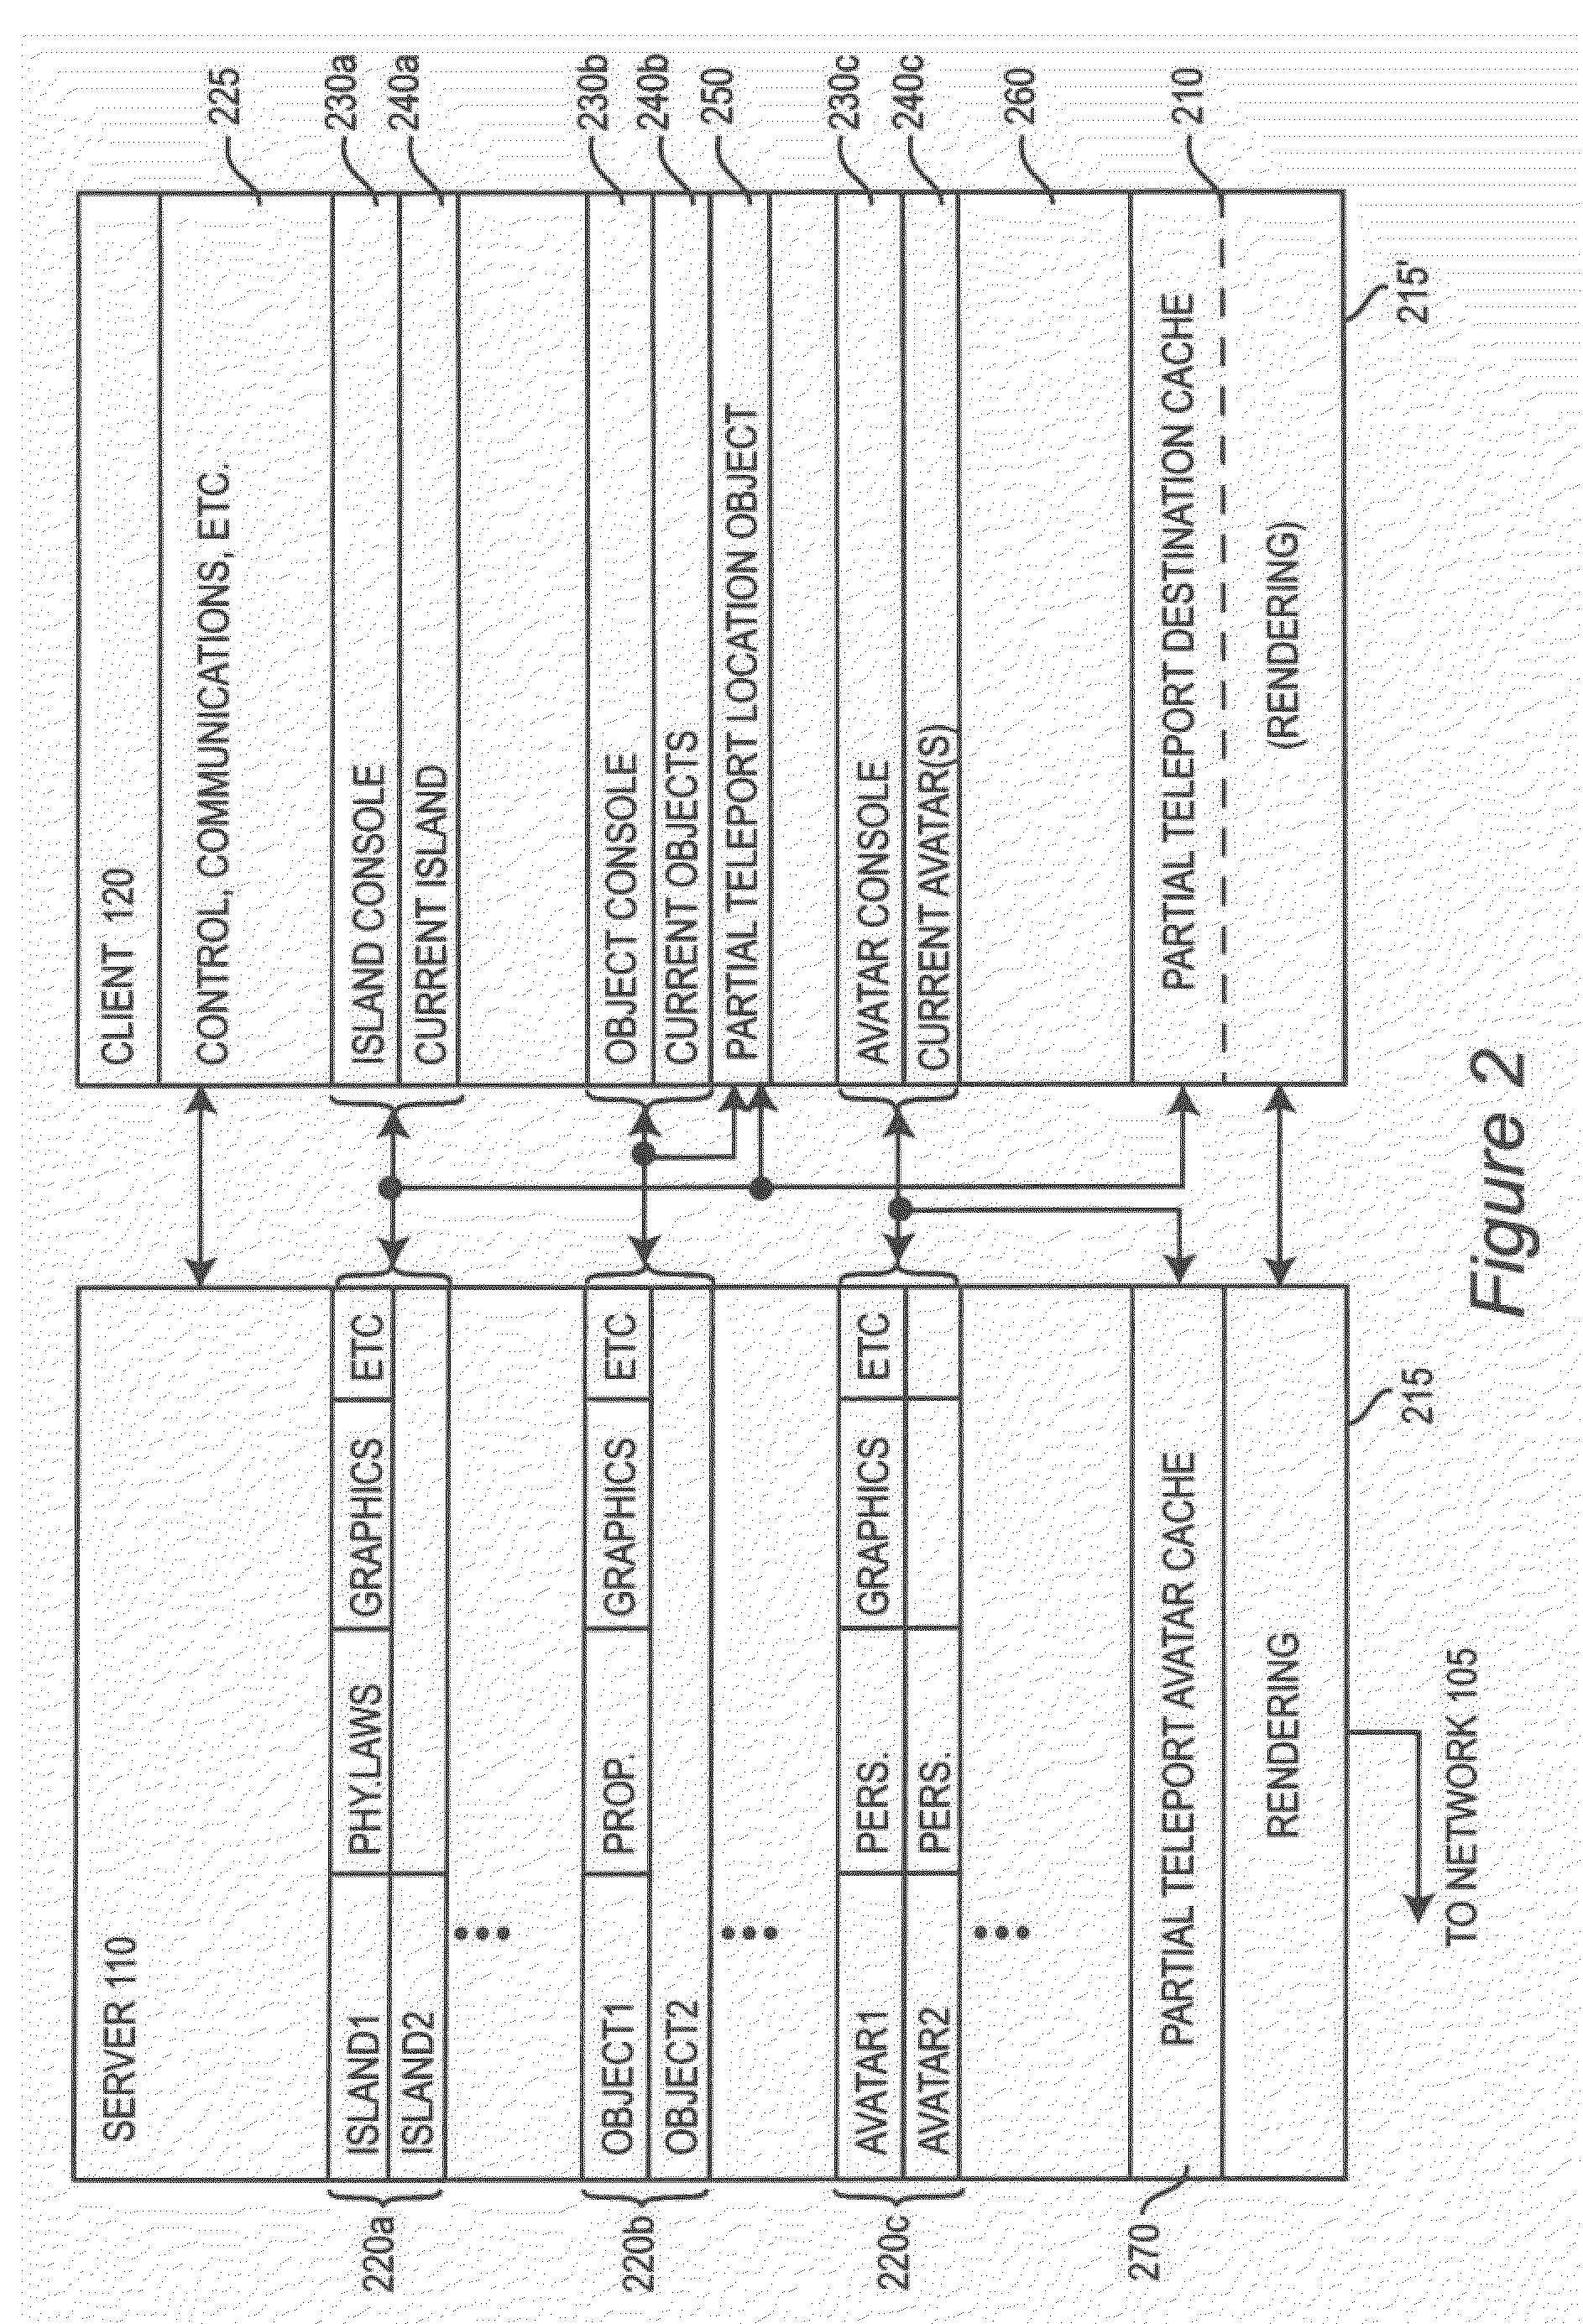 Method and System for Dynamic Detection of Affinity Between Virtual Entities